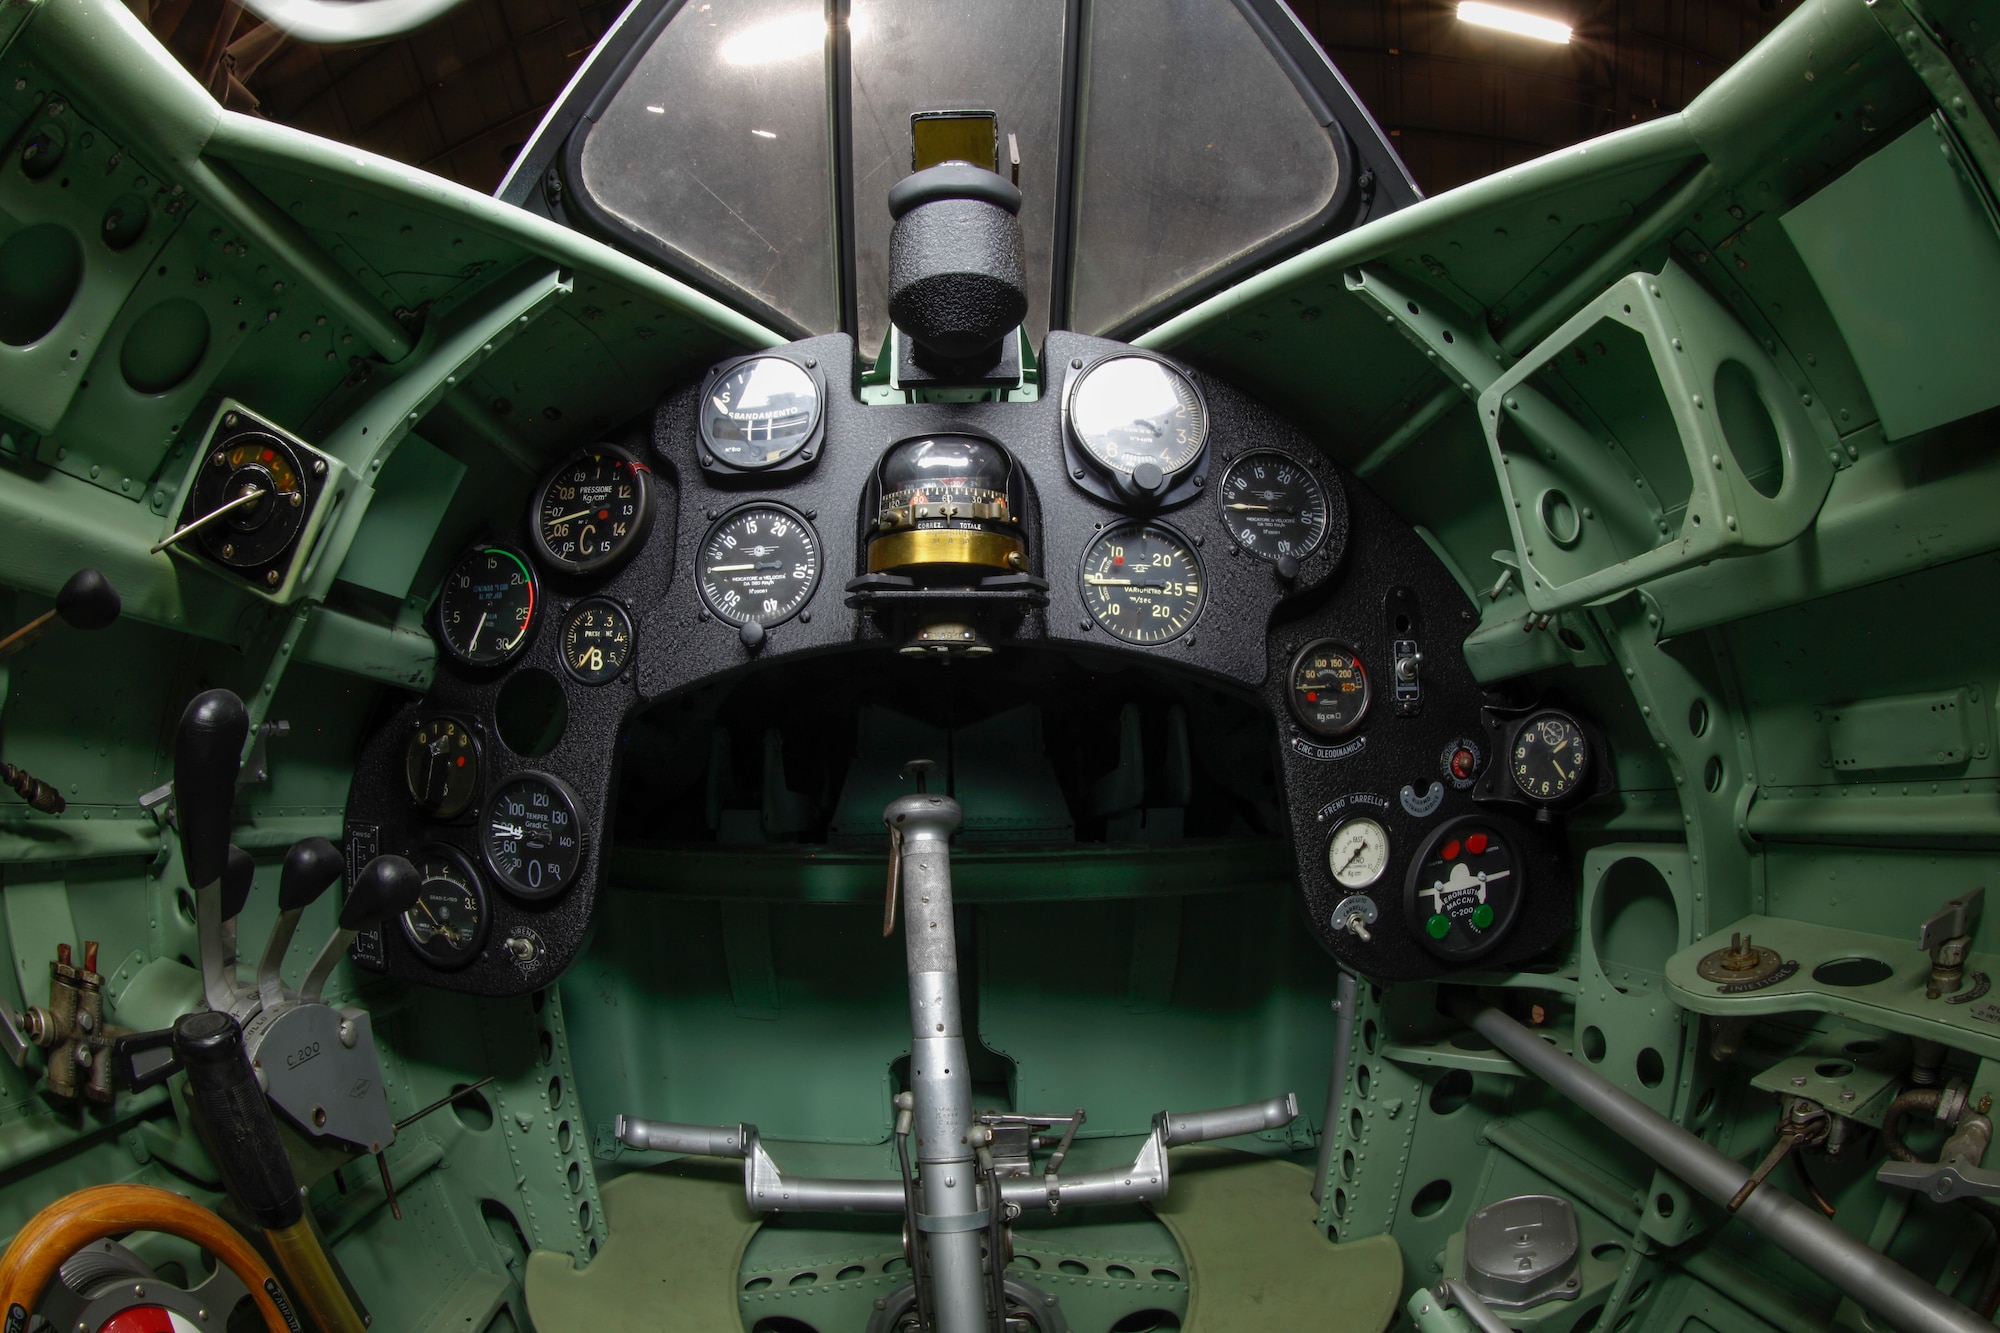 Cockpit view of the Macchi MC.200 Saetta in the National Museum of the U.S. Air Force World War II Gallery.